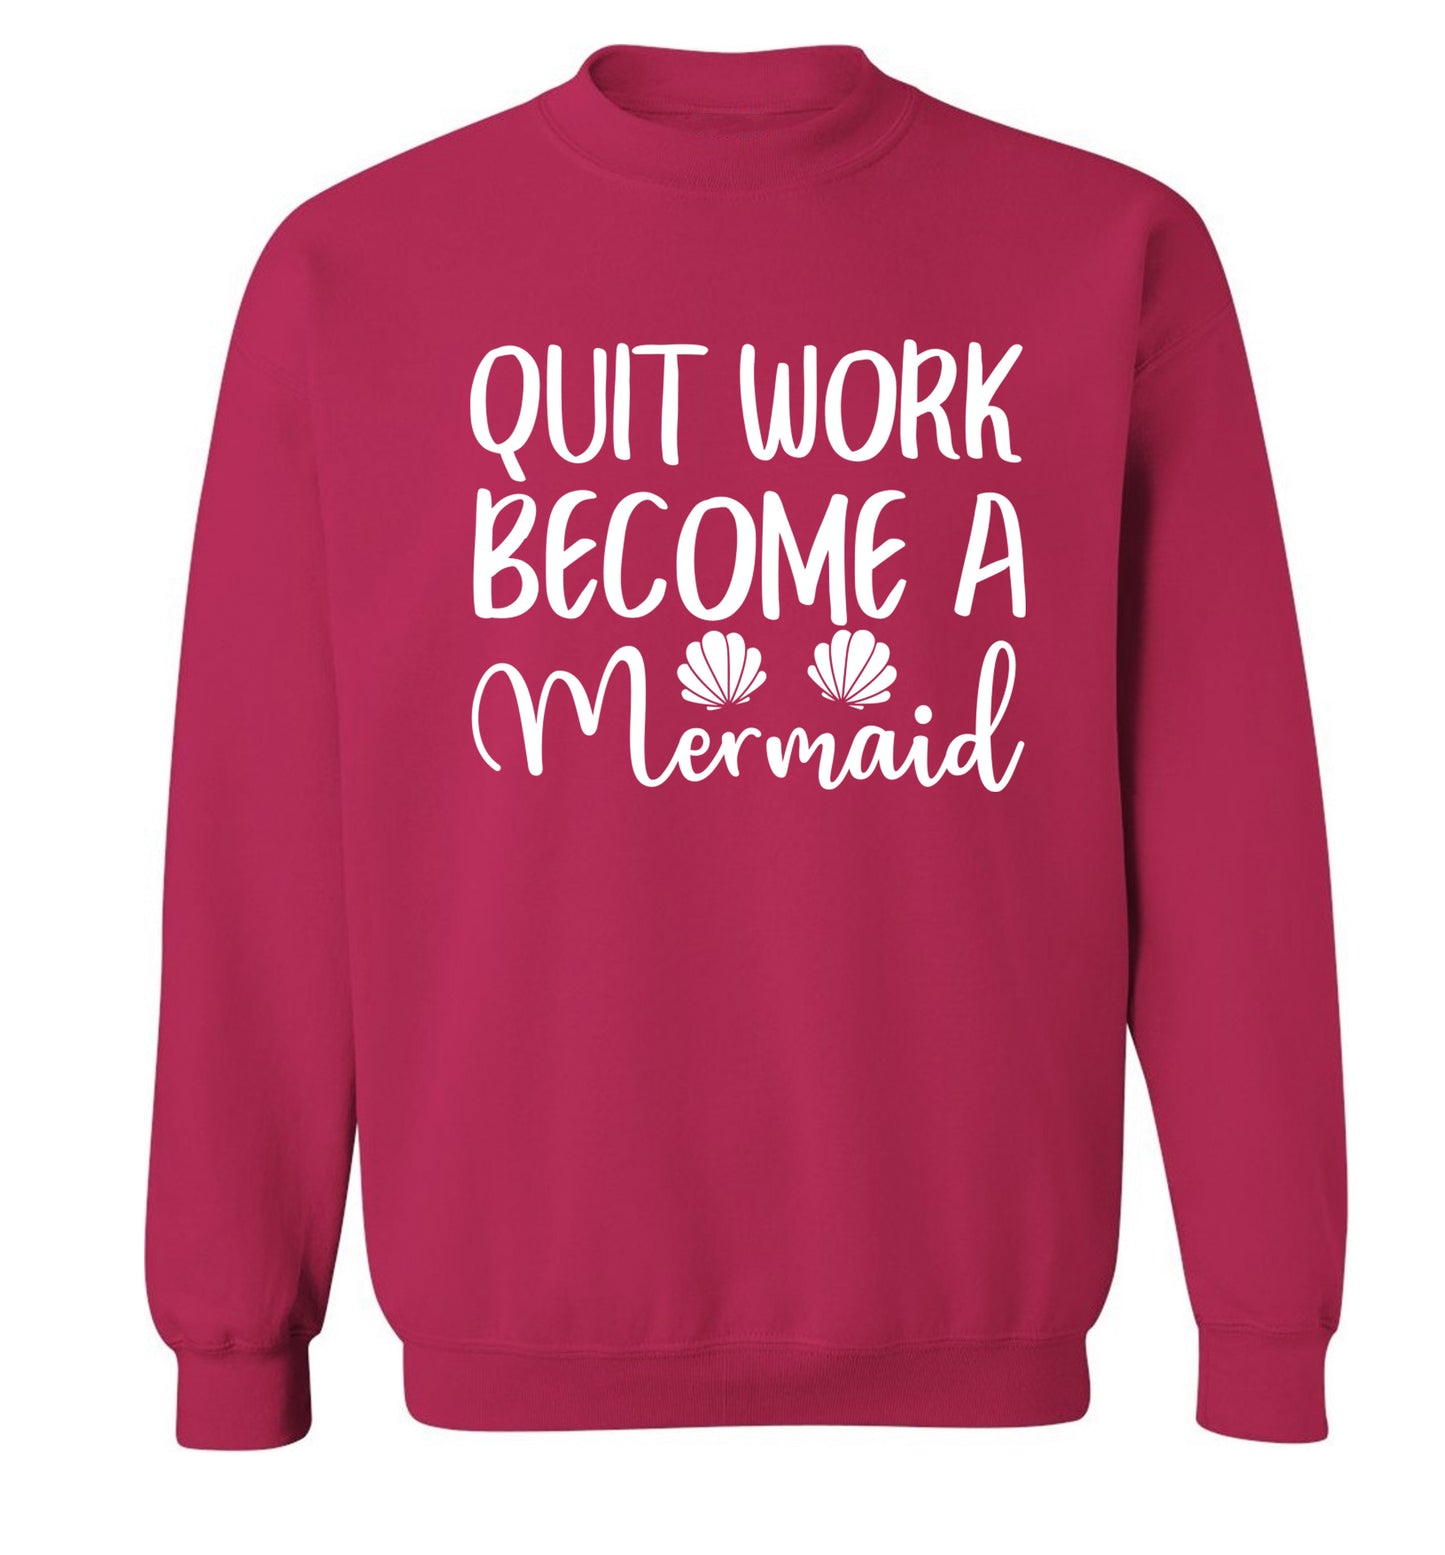 Quit work become a mermaid Adult's unisex pink Sweater 2XL